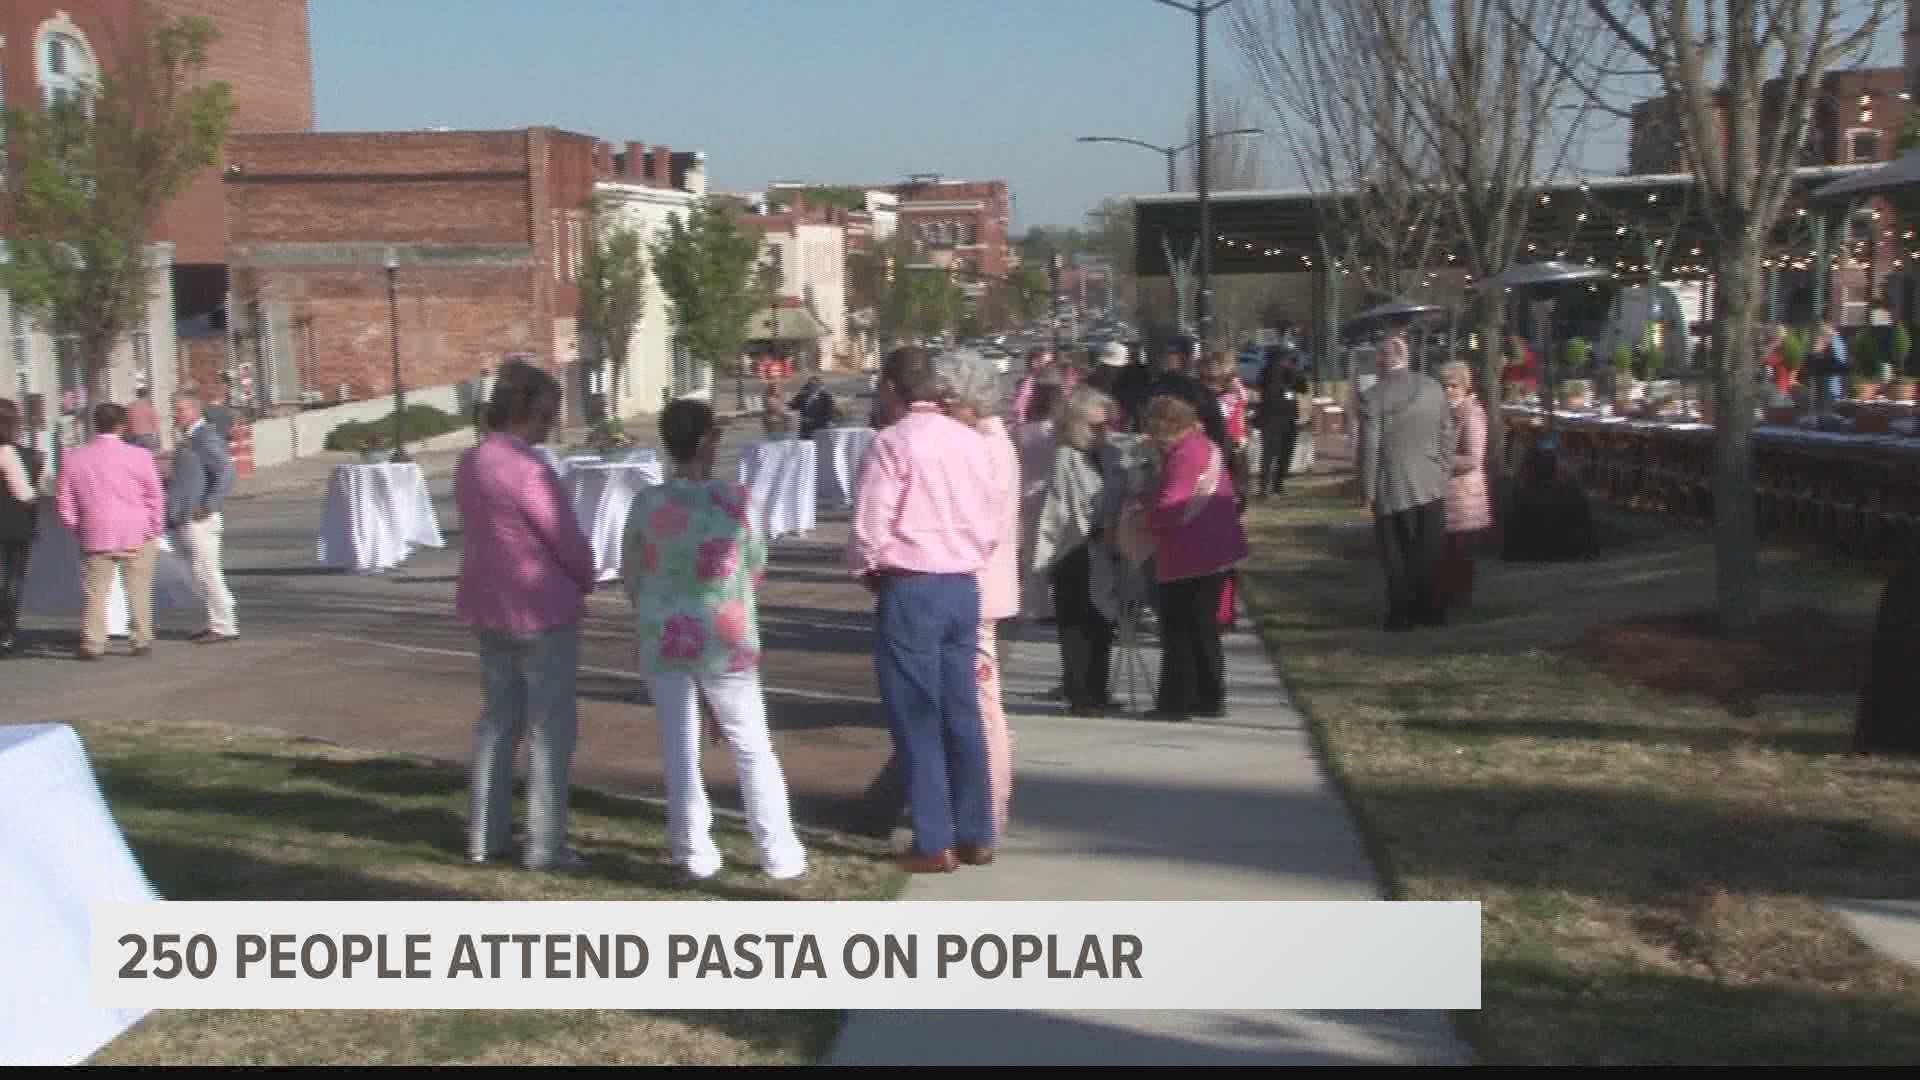 The Cherry Blossom Festival kicked off Friday by bringing a taste of Italy to downtown Macon.